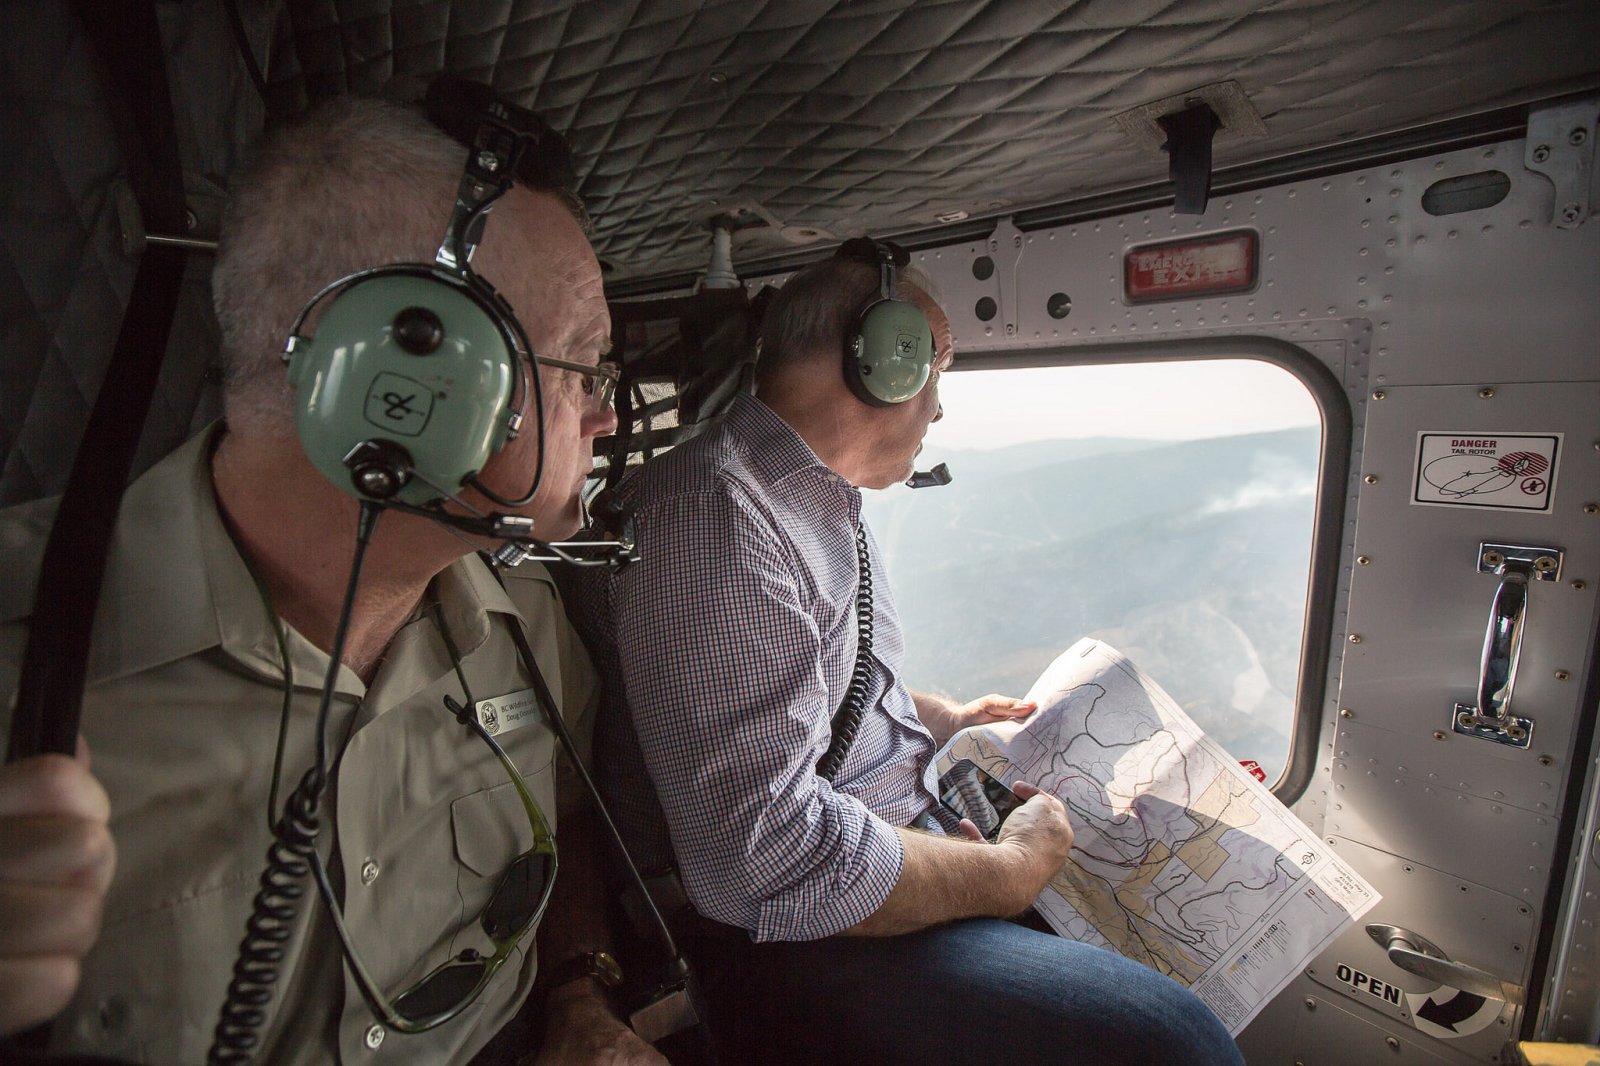 B.C. Premier John Horgan and Forests Minister Doug Donaldson visit areas affected by wildfires this summer. Government photo. 